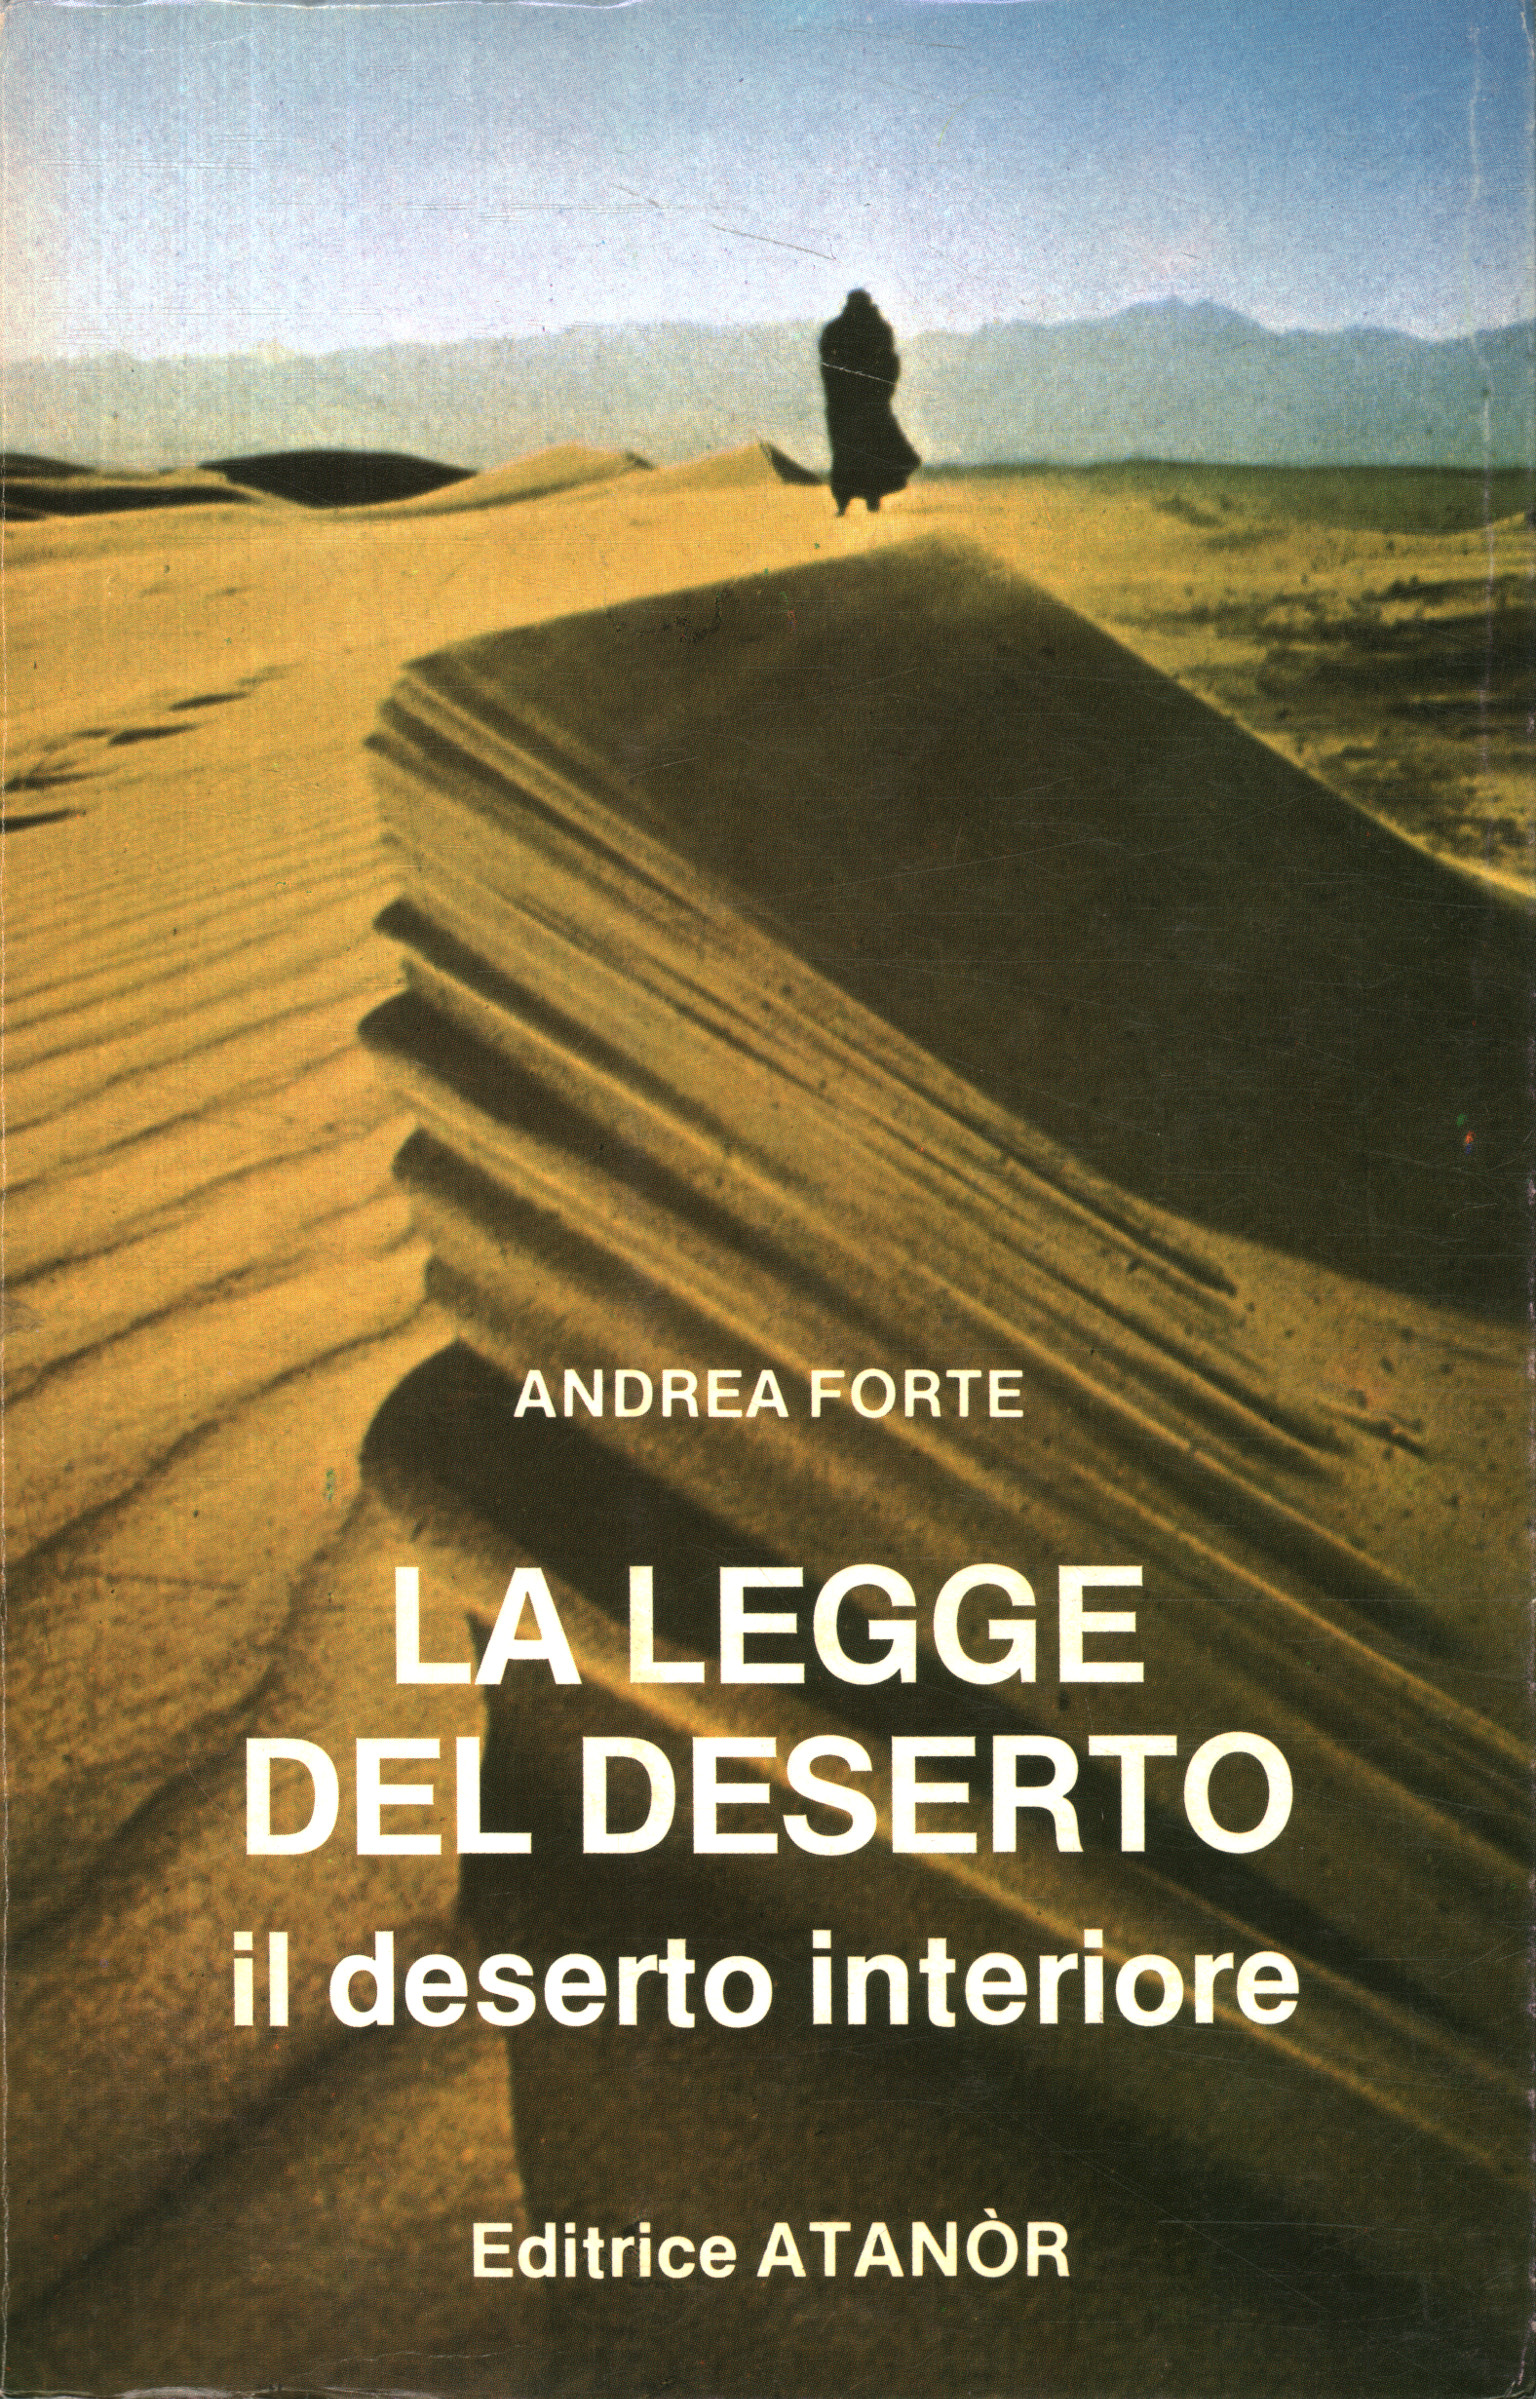 The law of the desert